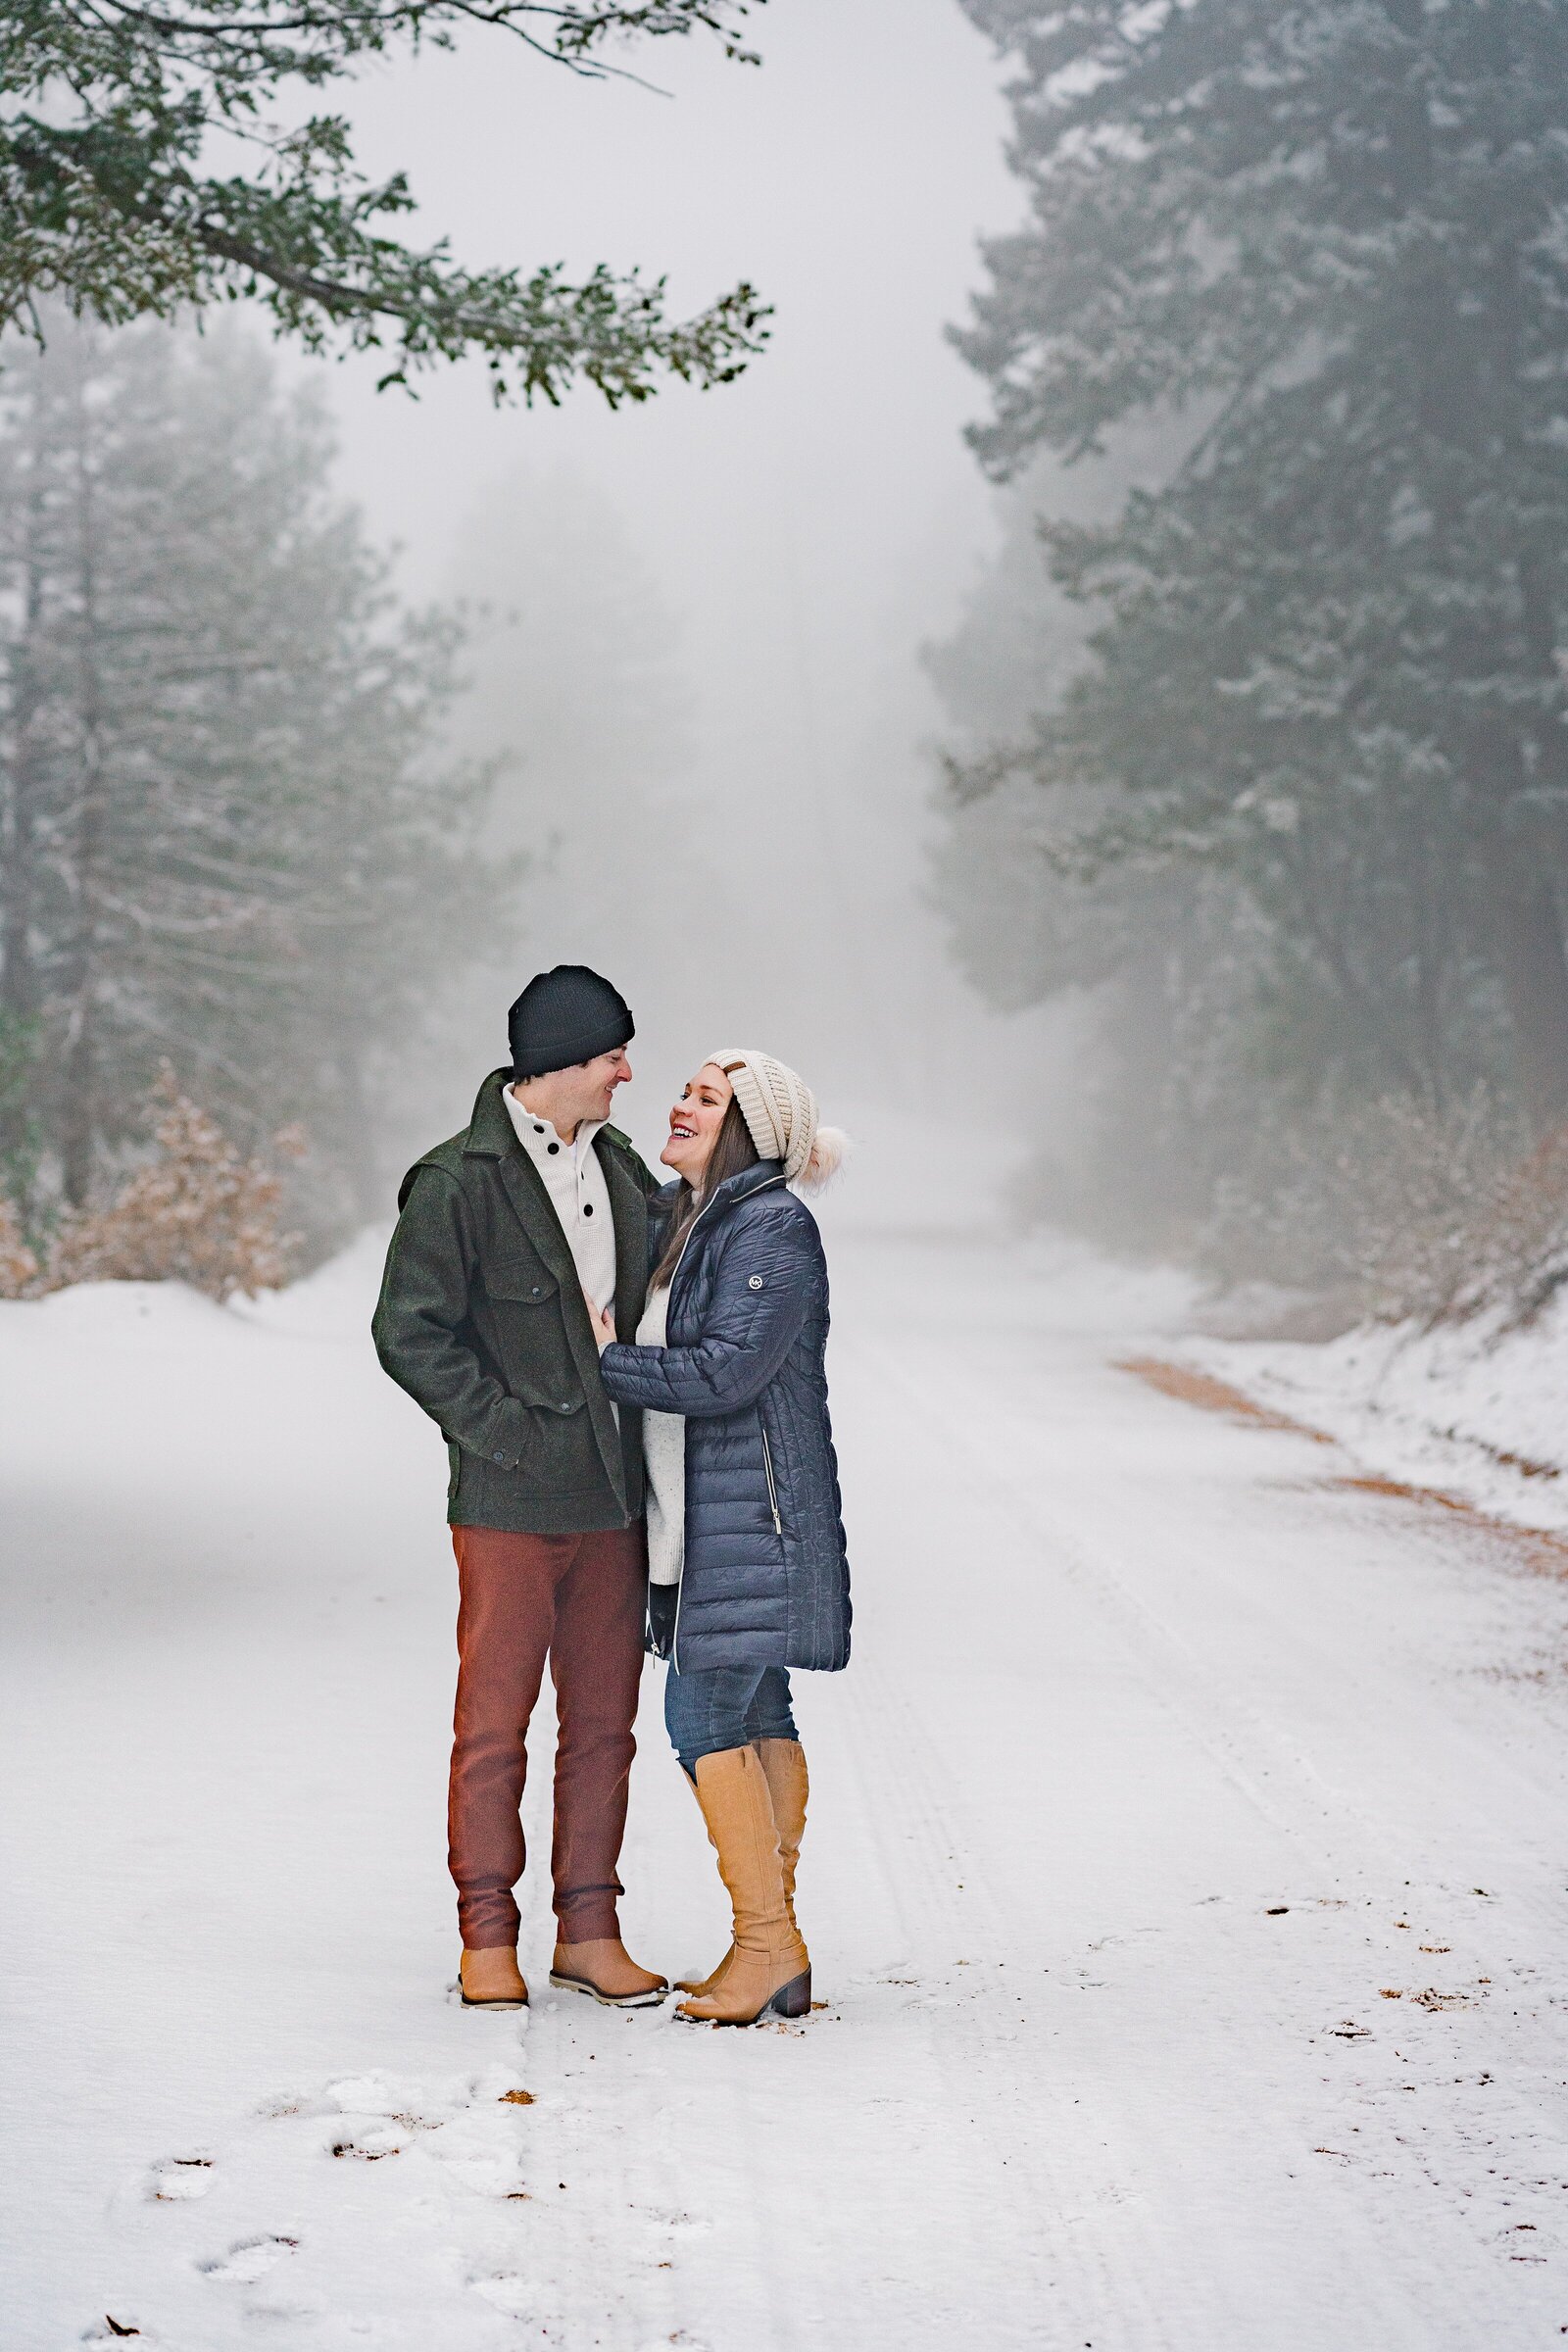 Celebrate your engagement amidst Colorado's stunning natural light with Samantha Immer Photography. Our candid and storytelling approach will capture your love story in beautiful photos.